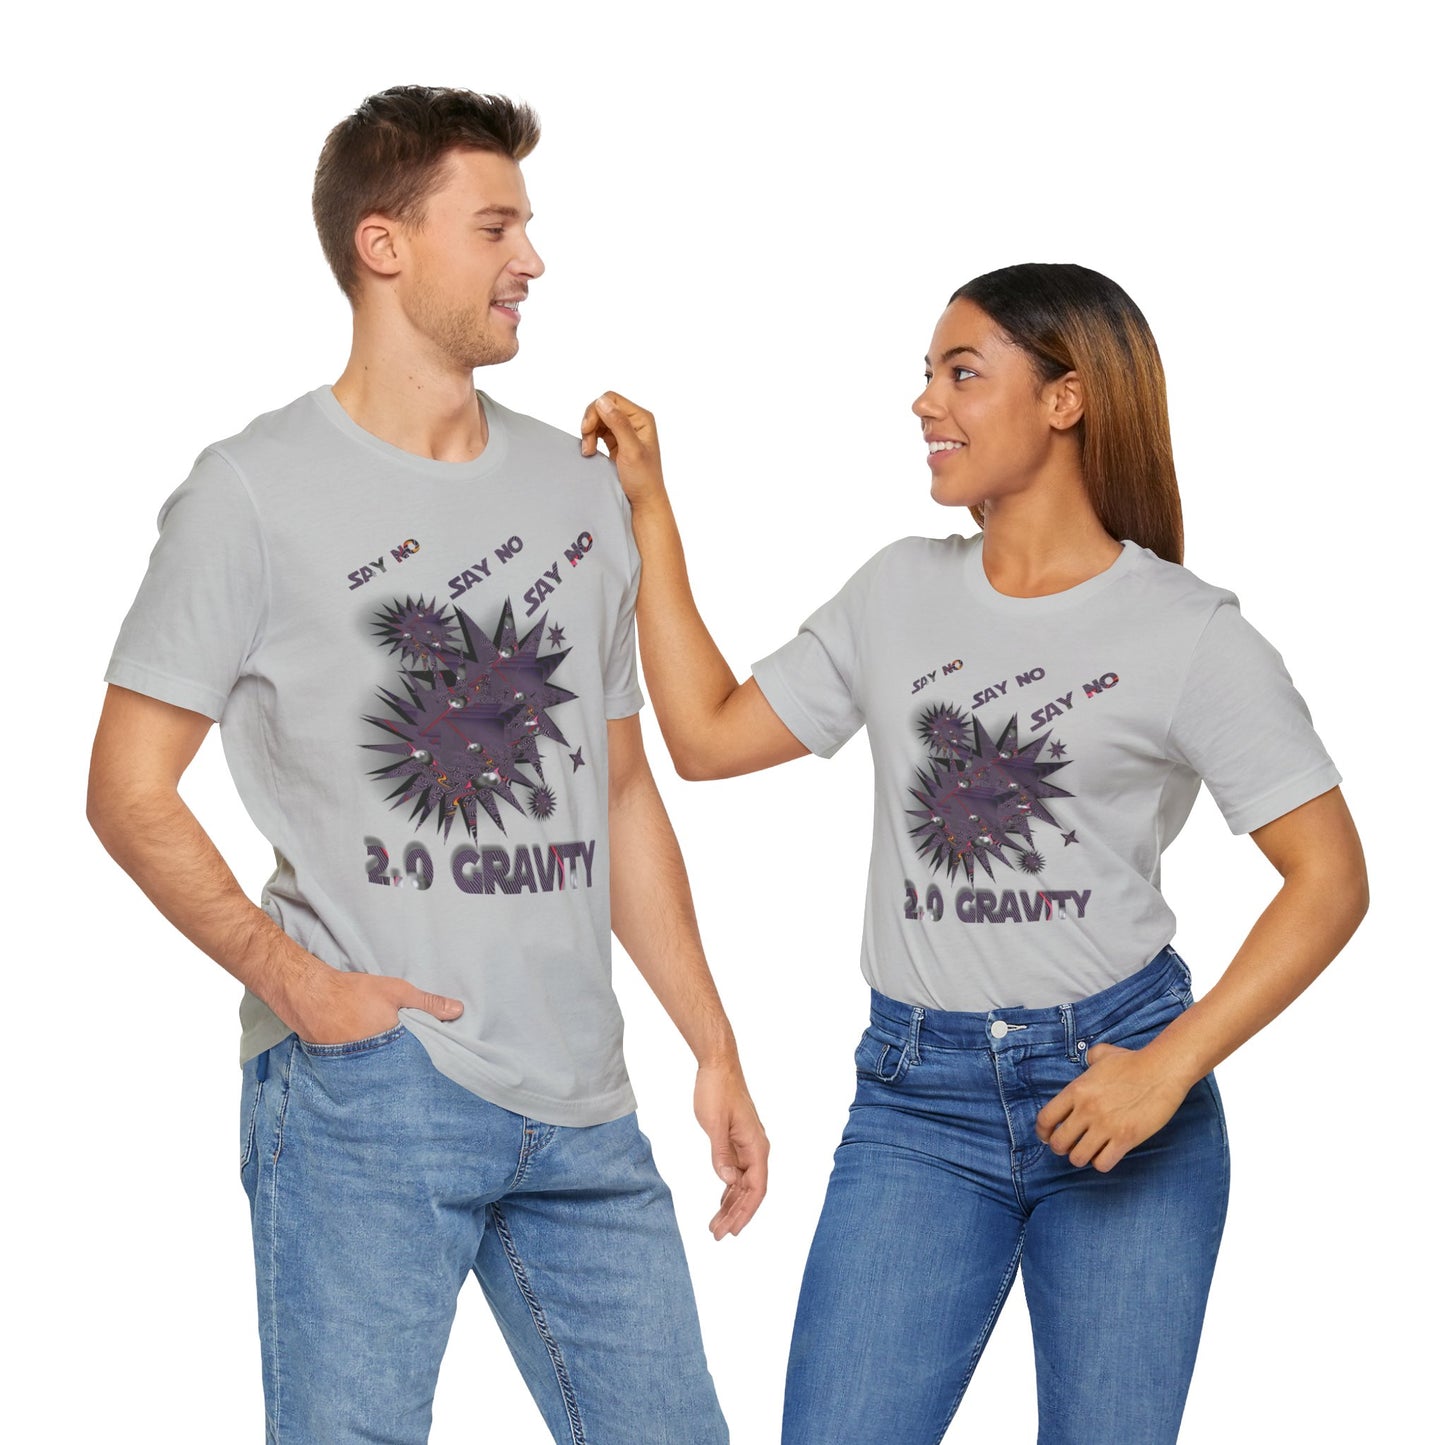 Gravity 2.0 - Hurts Shirts Collection